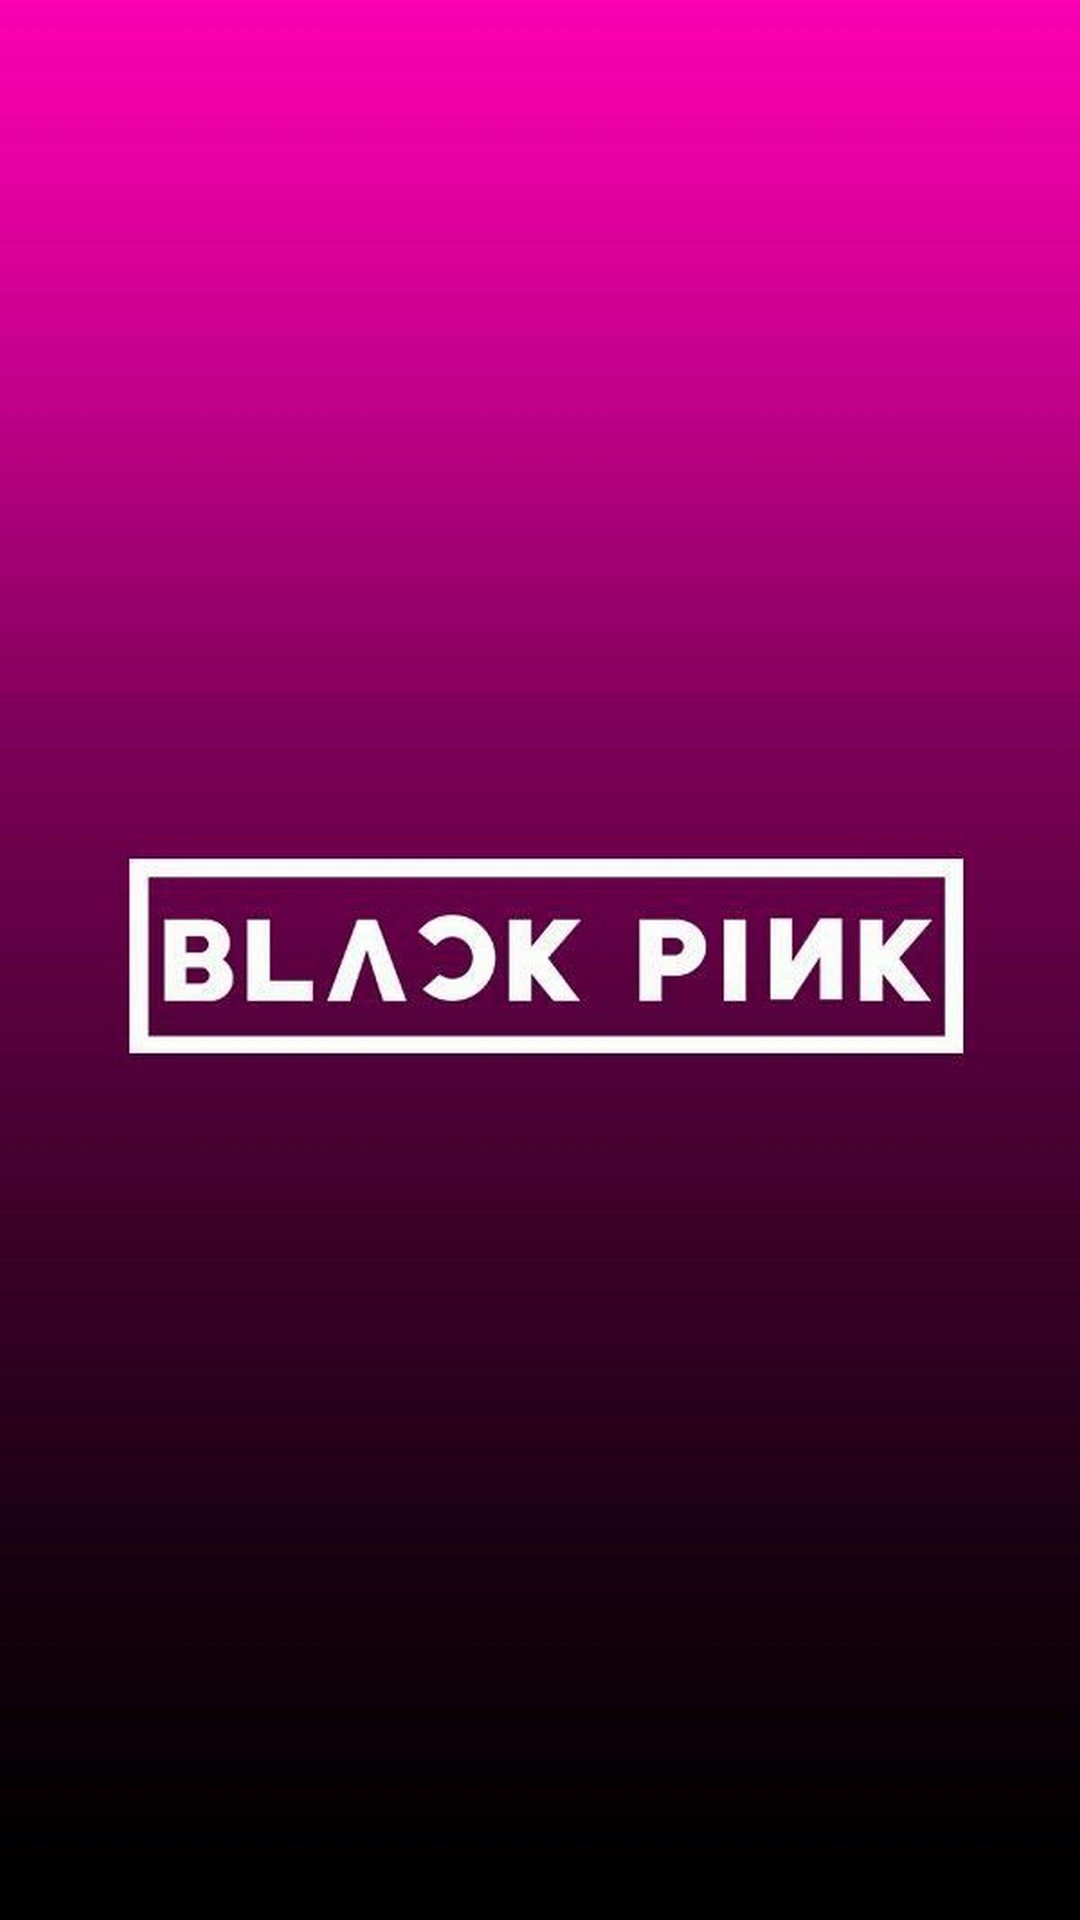 K-POP Blackpink Wallpaper for Phones with high-resolution 1080x1920 pixel. Download all Mobile Wallpapers and Use them as wallpapers for your iPhone, Tablet, iPad, Android and other mobile devices